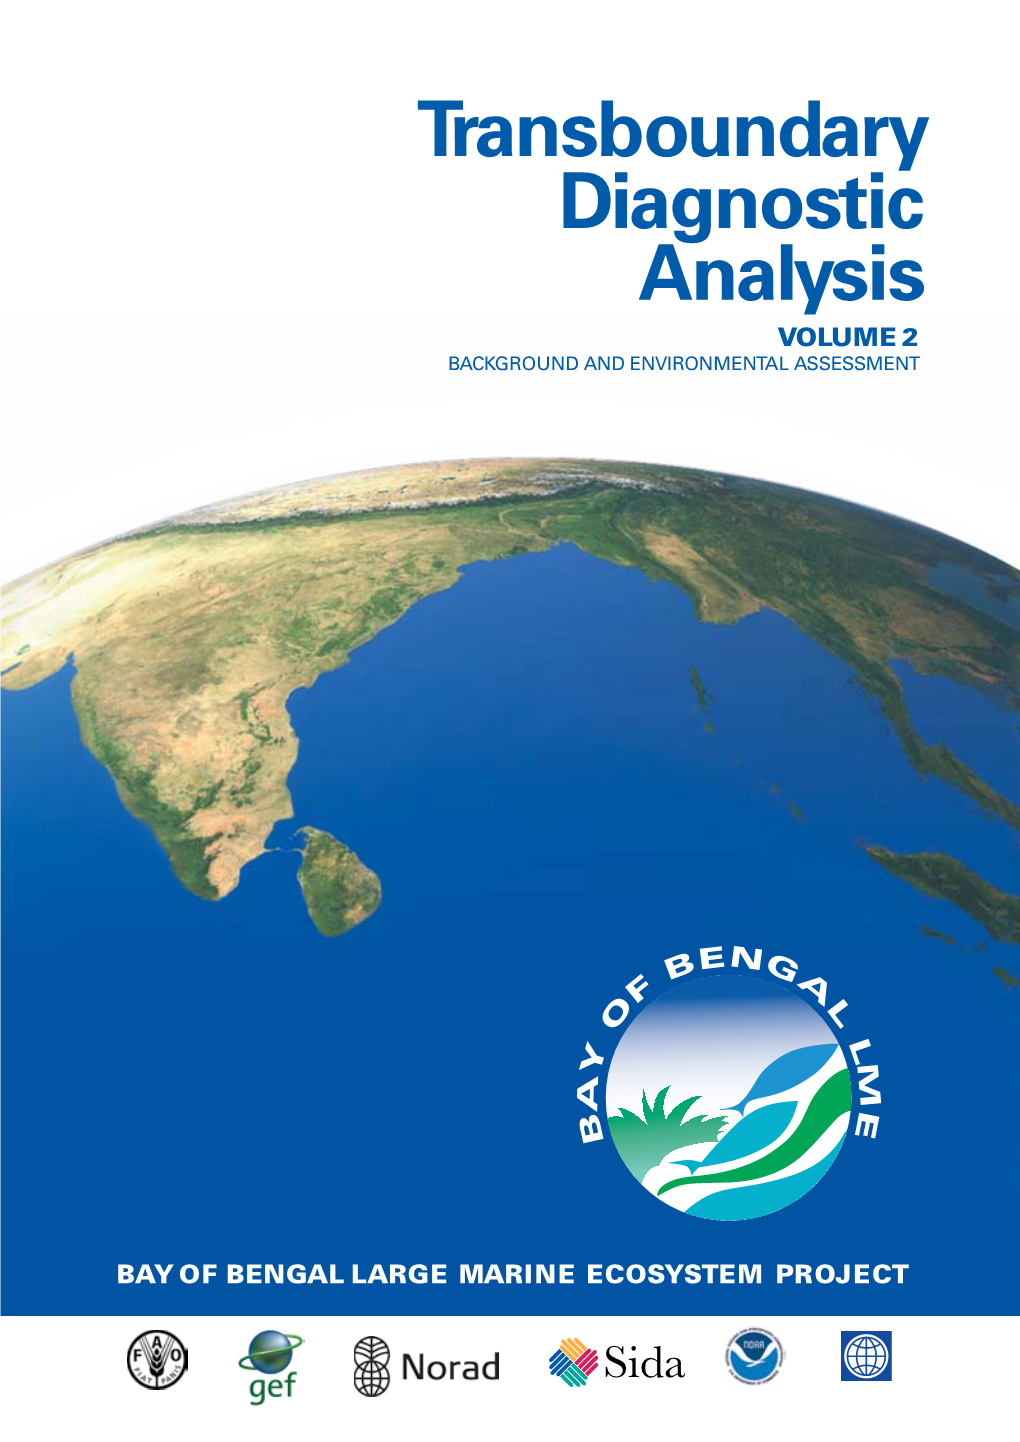 Transboundary Diagnostic Analysis VOLUME 2 BACKGROUND and ENVIRONMENTAL ASSESSMENT